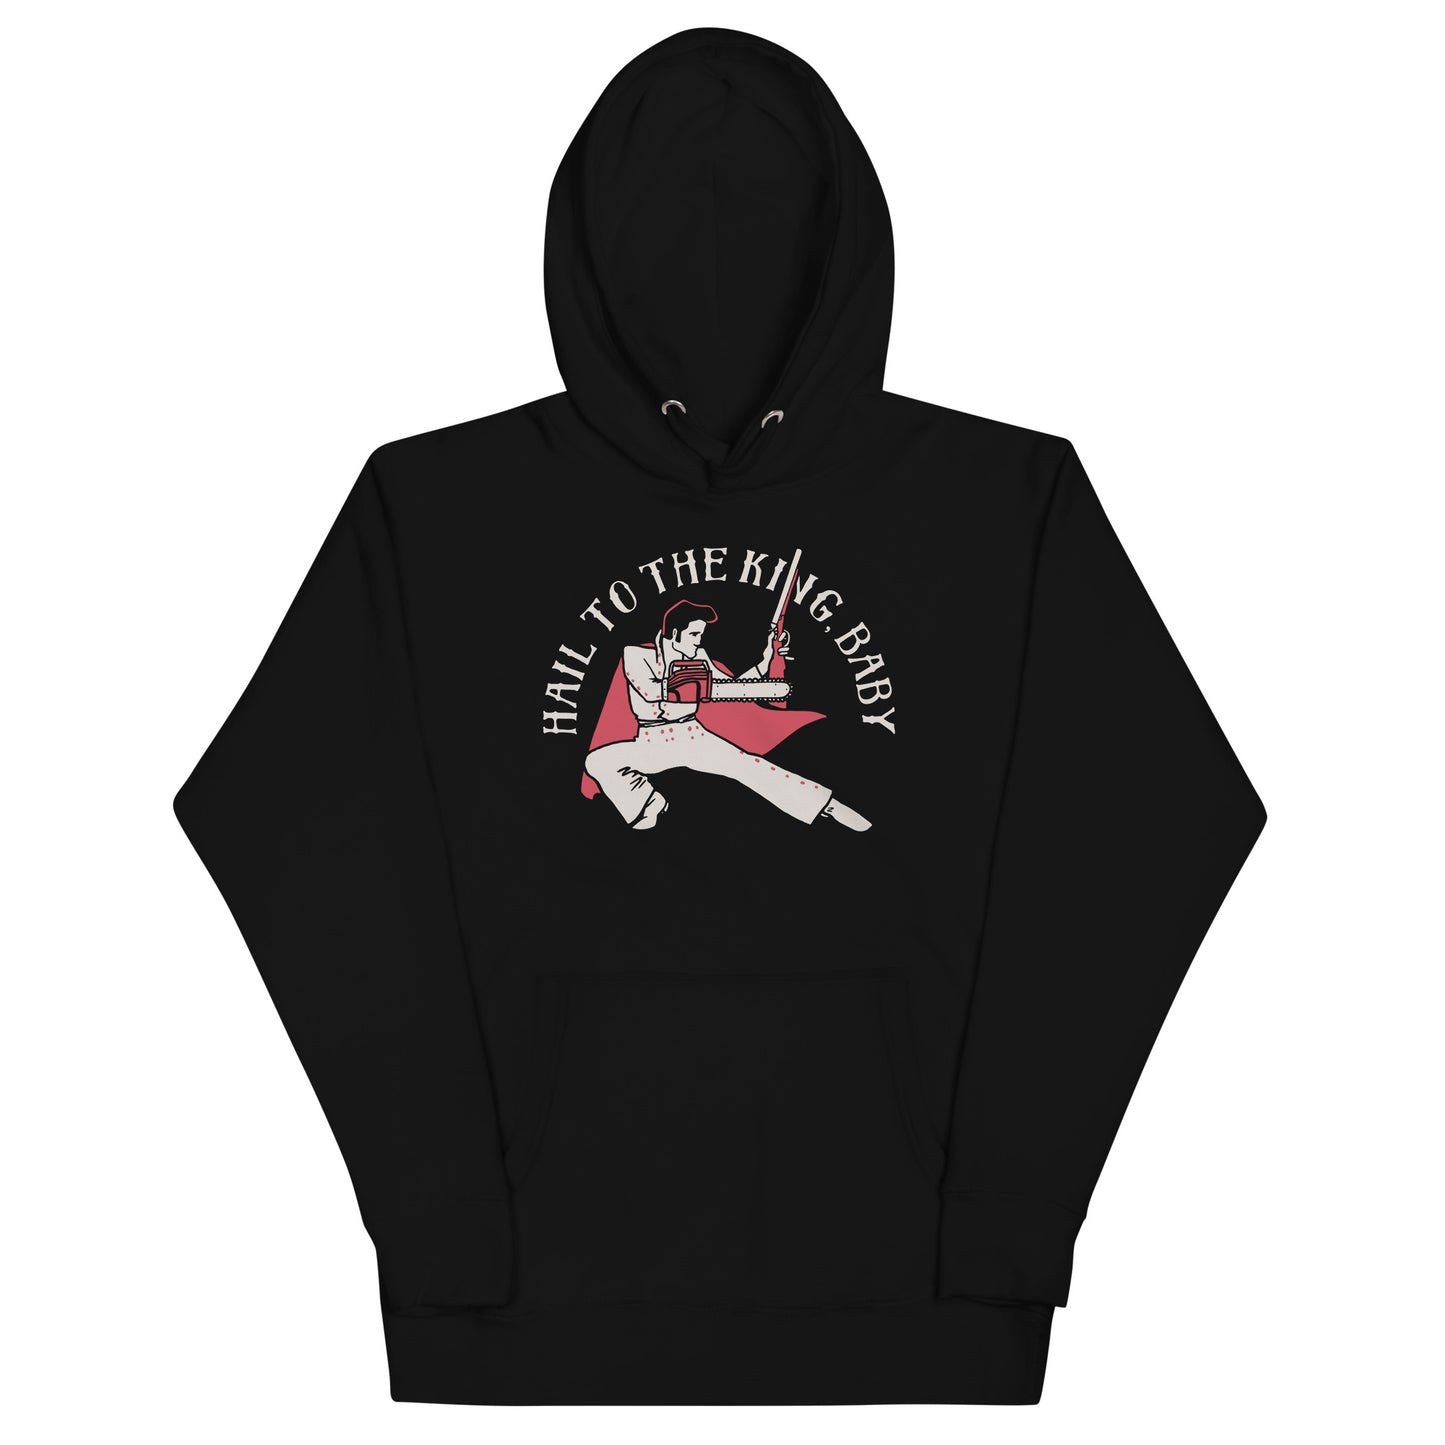 Hail To The King, Baby Unisex Hoodie